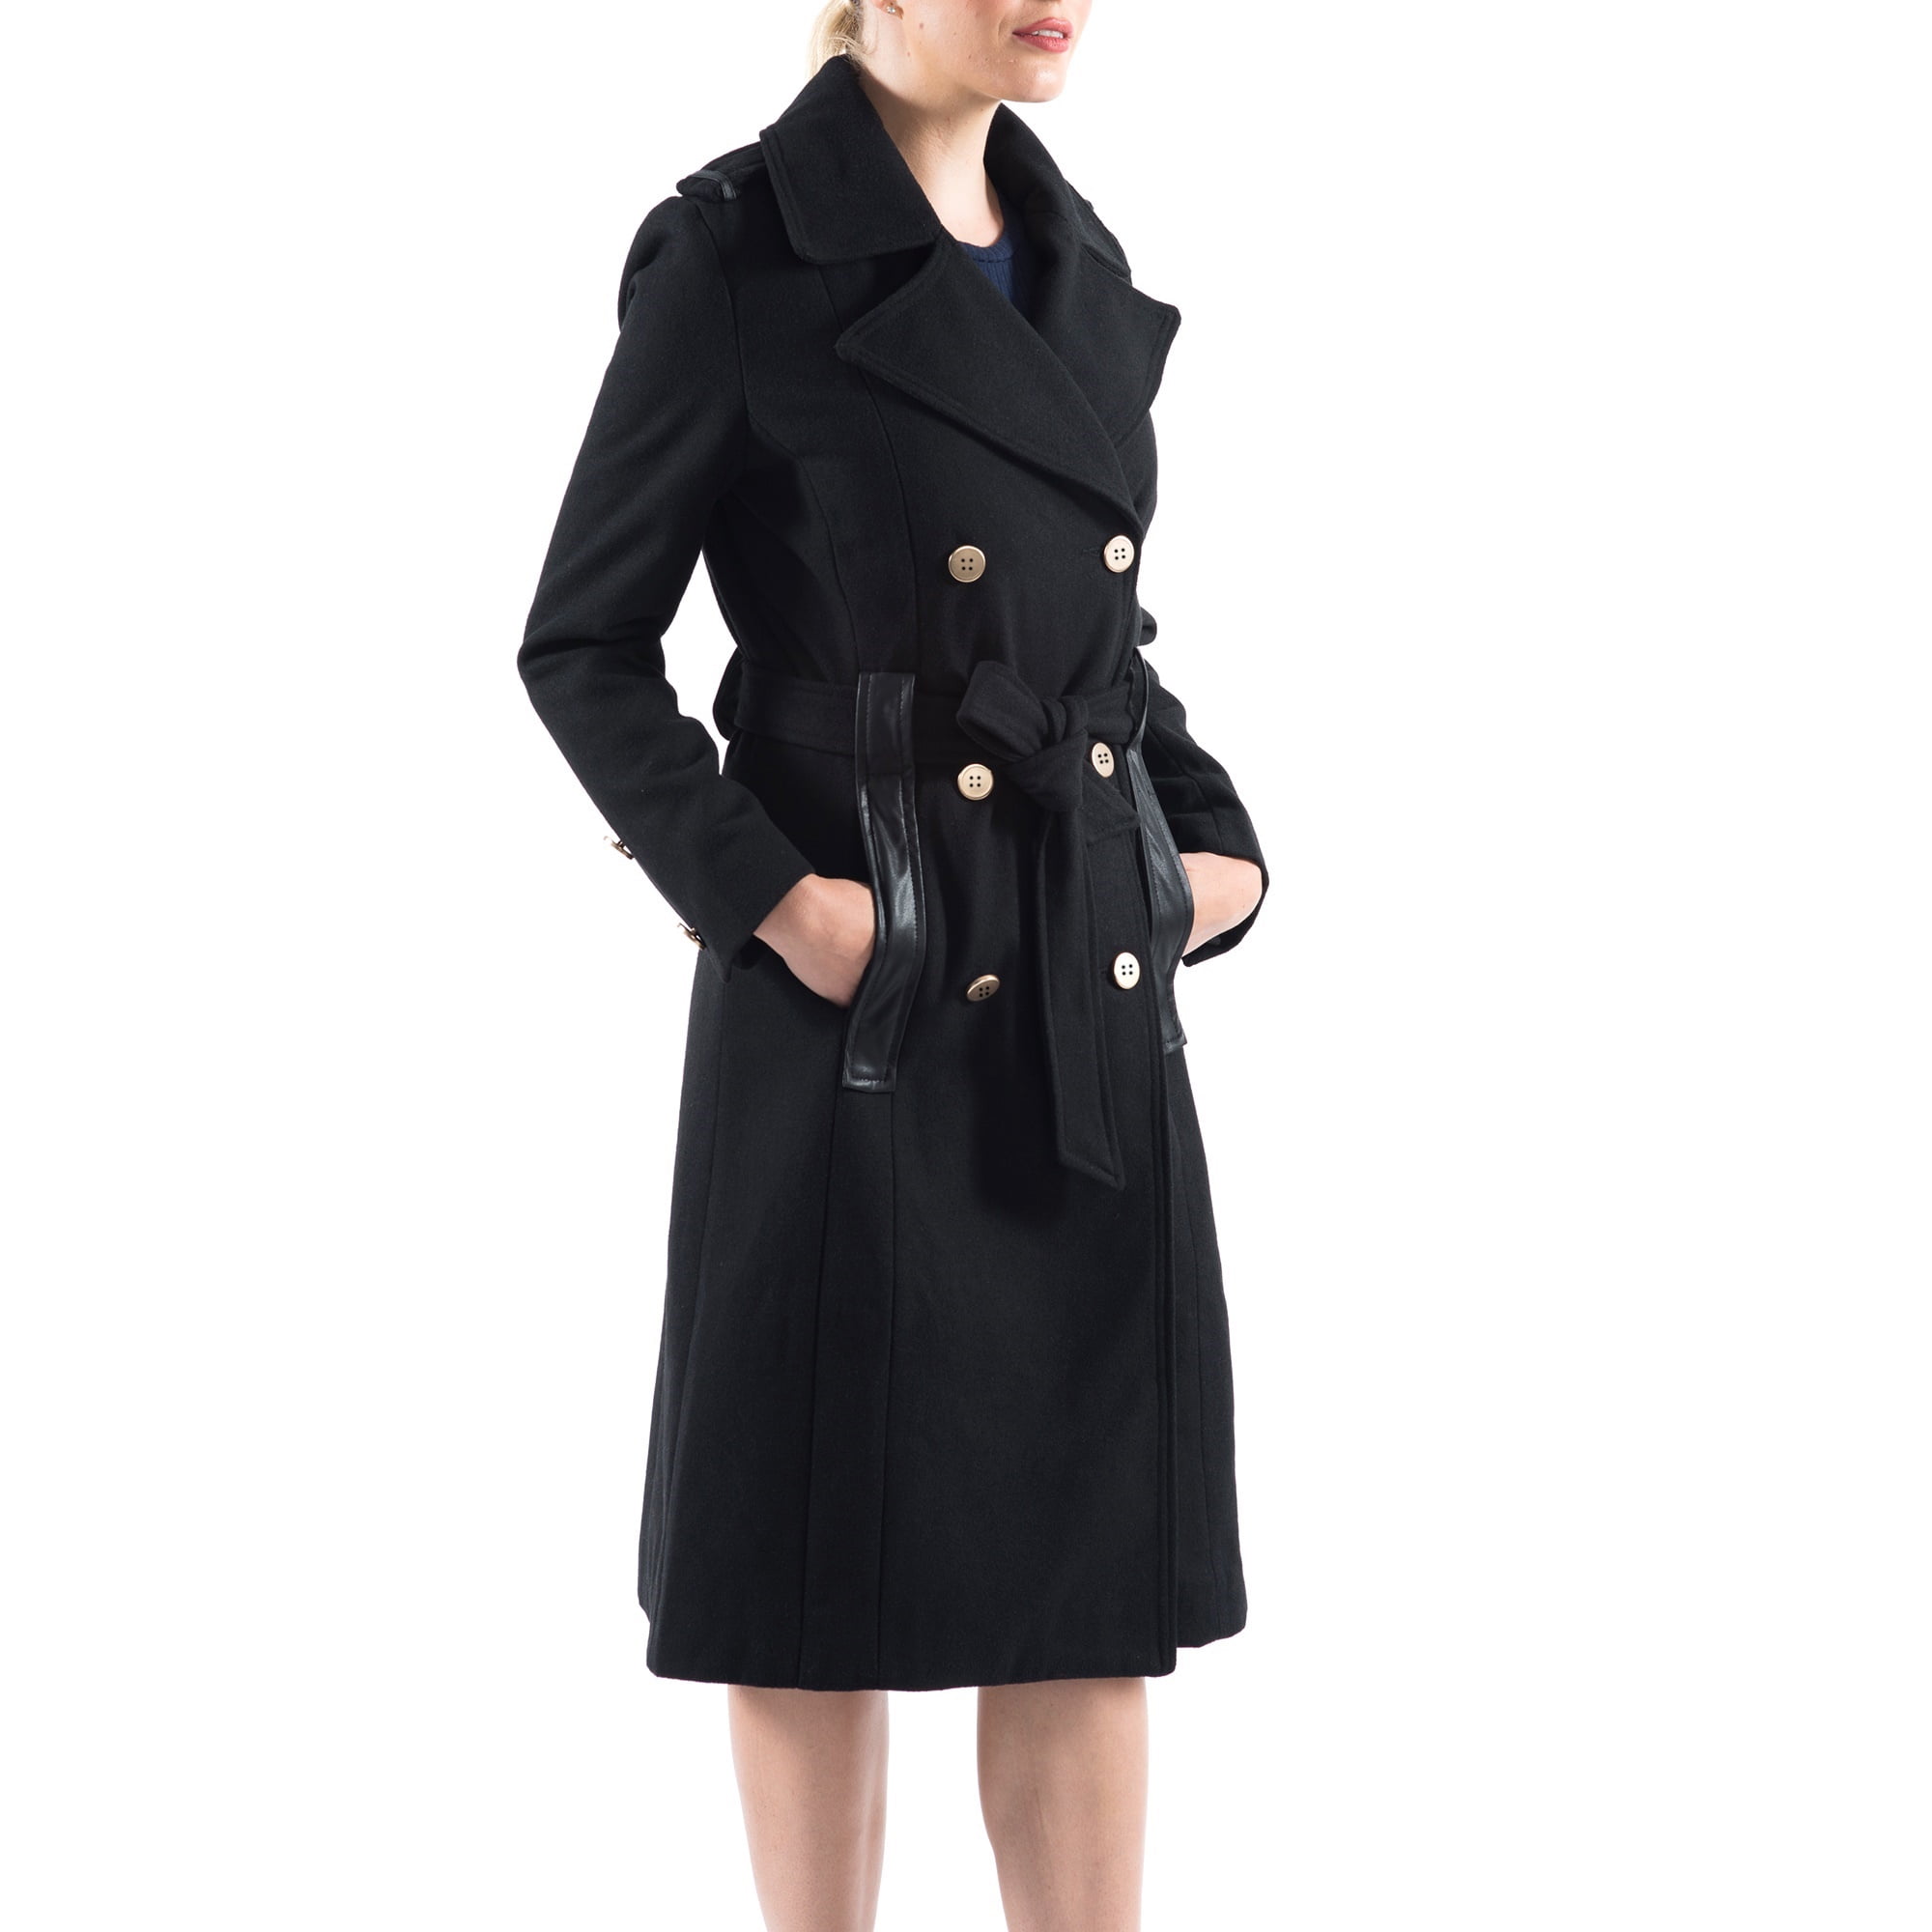 New Ladies Single Button Military Trench Coats 16-22 